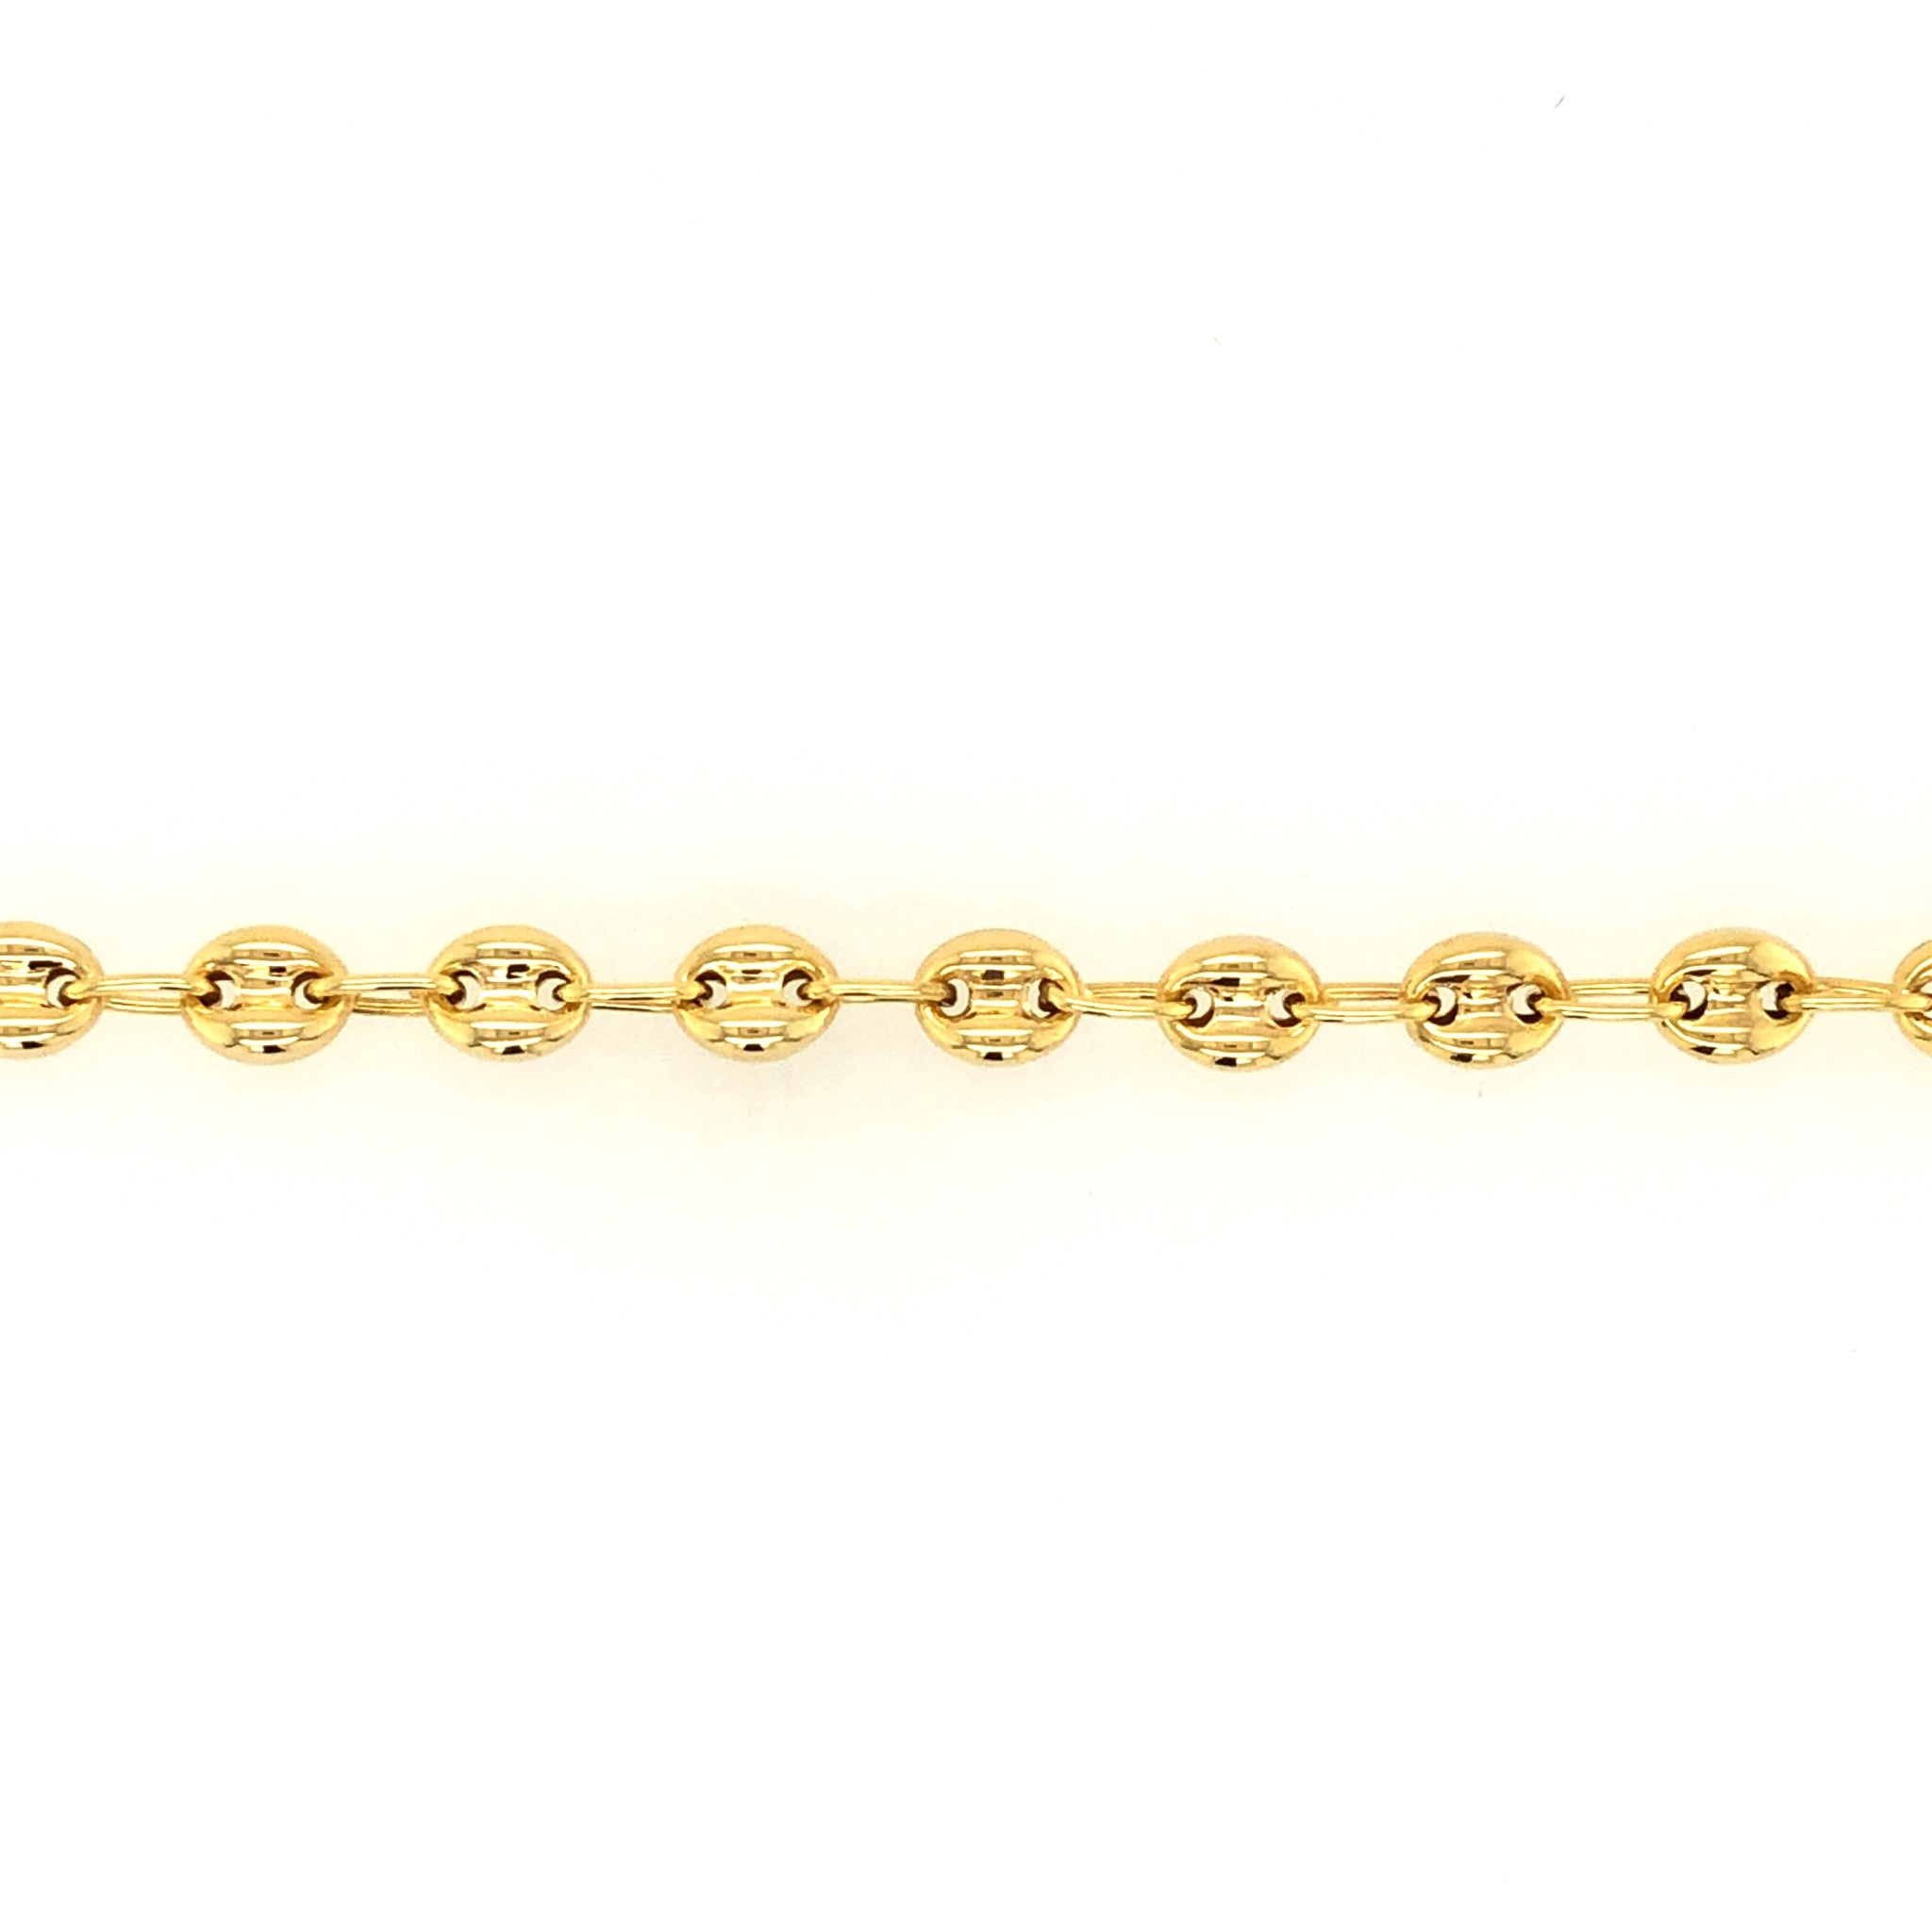 20030 14K YELLOW GOLD PUFFY GUCCI LINK BABY BRACELET